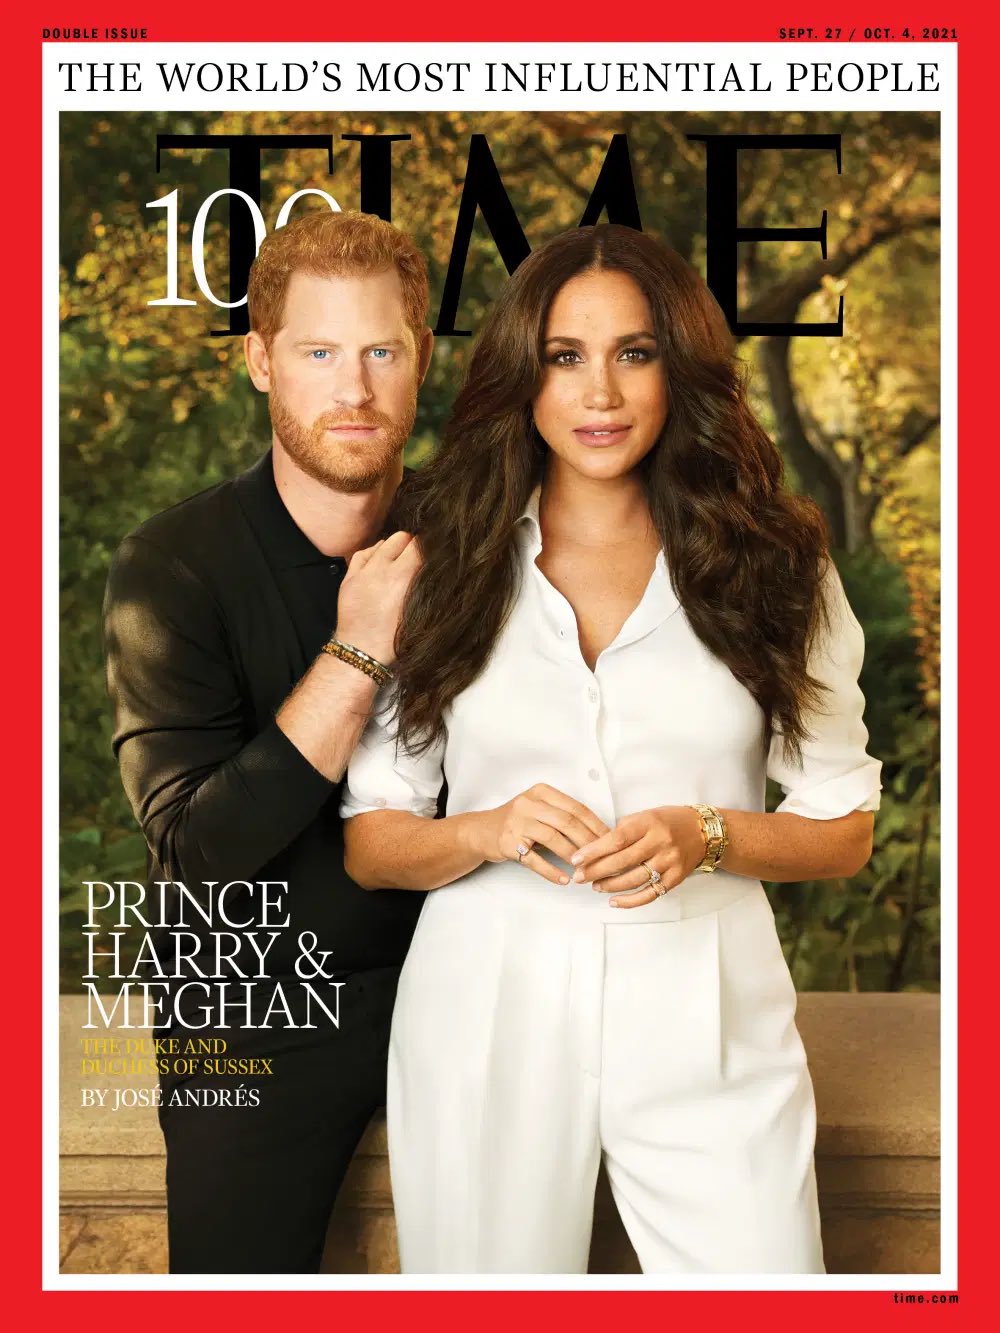 The Duke and Duchess of Sussex have made this year’s TIME 100 Most Influential List and they are the cover stars for the list.